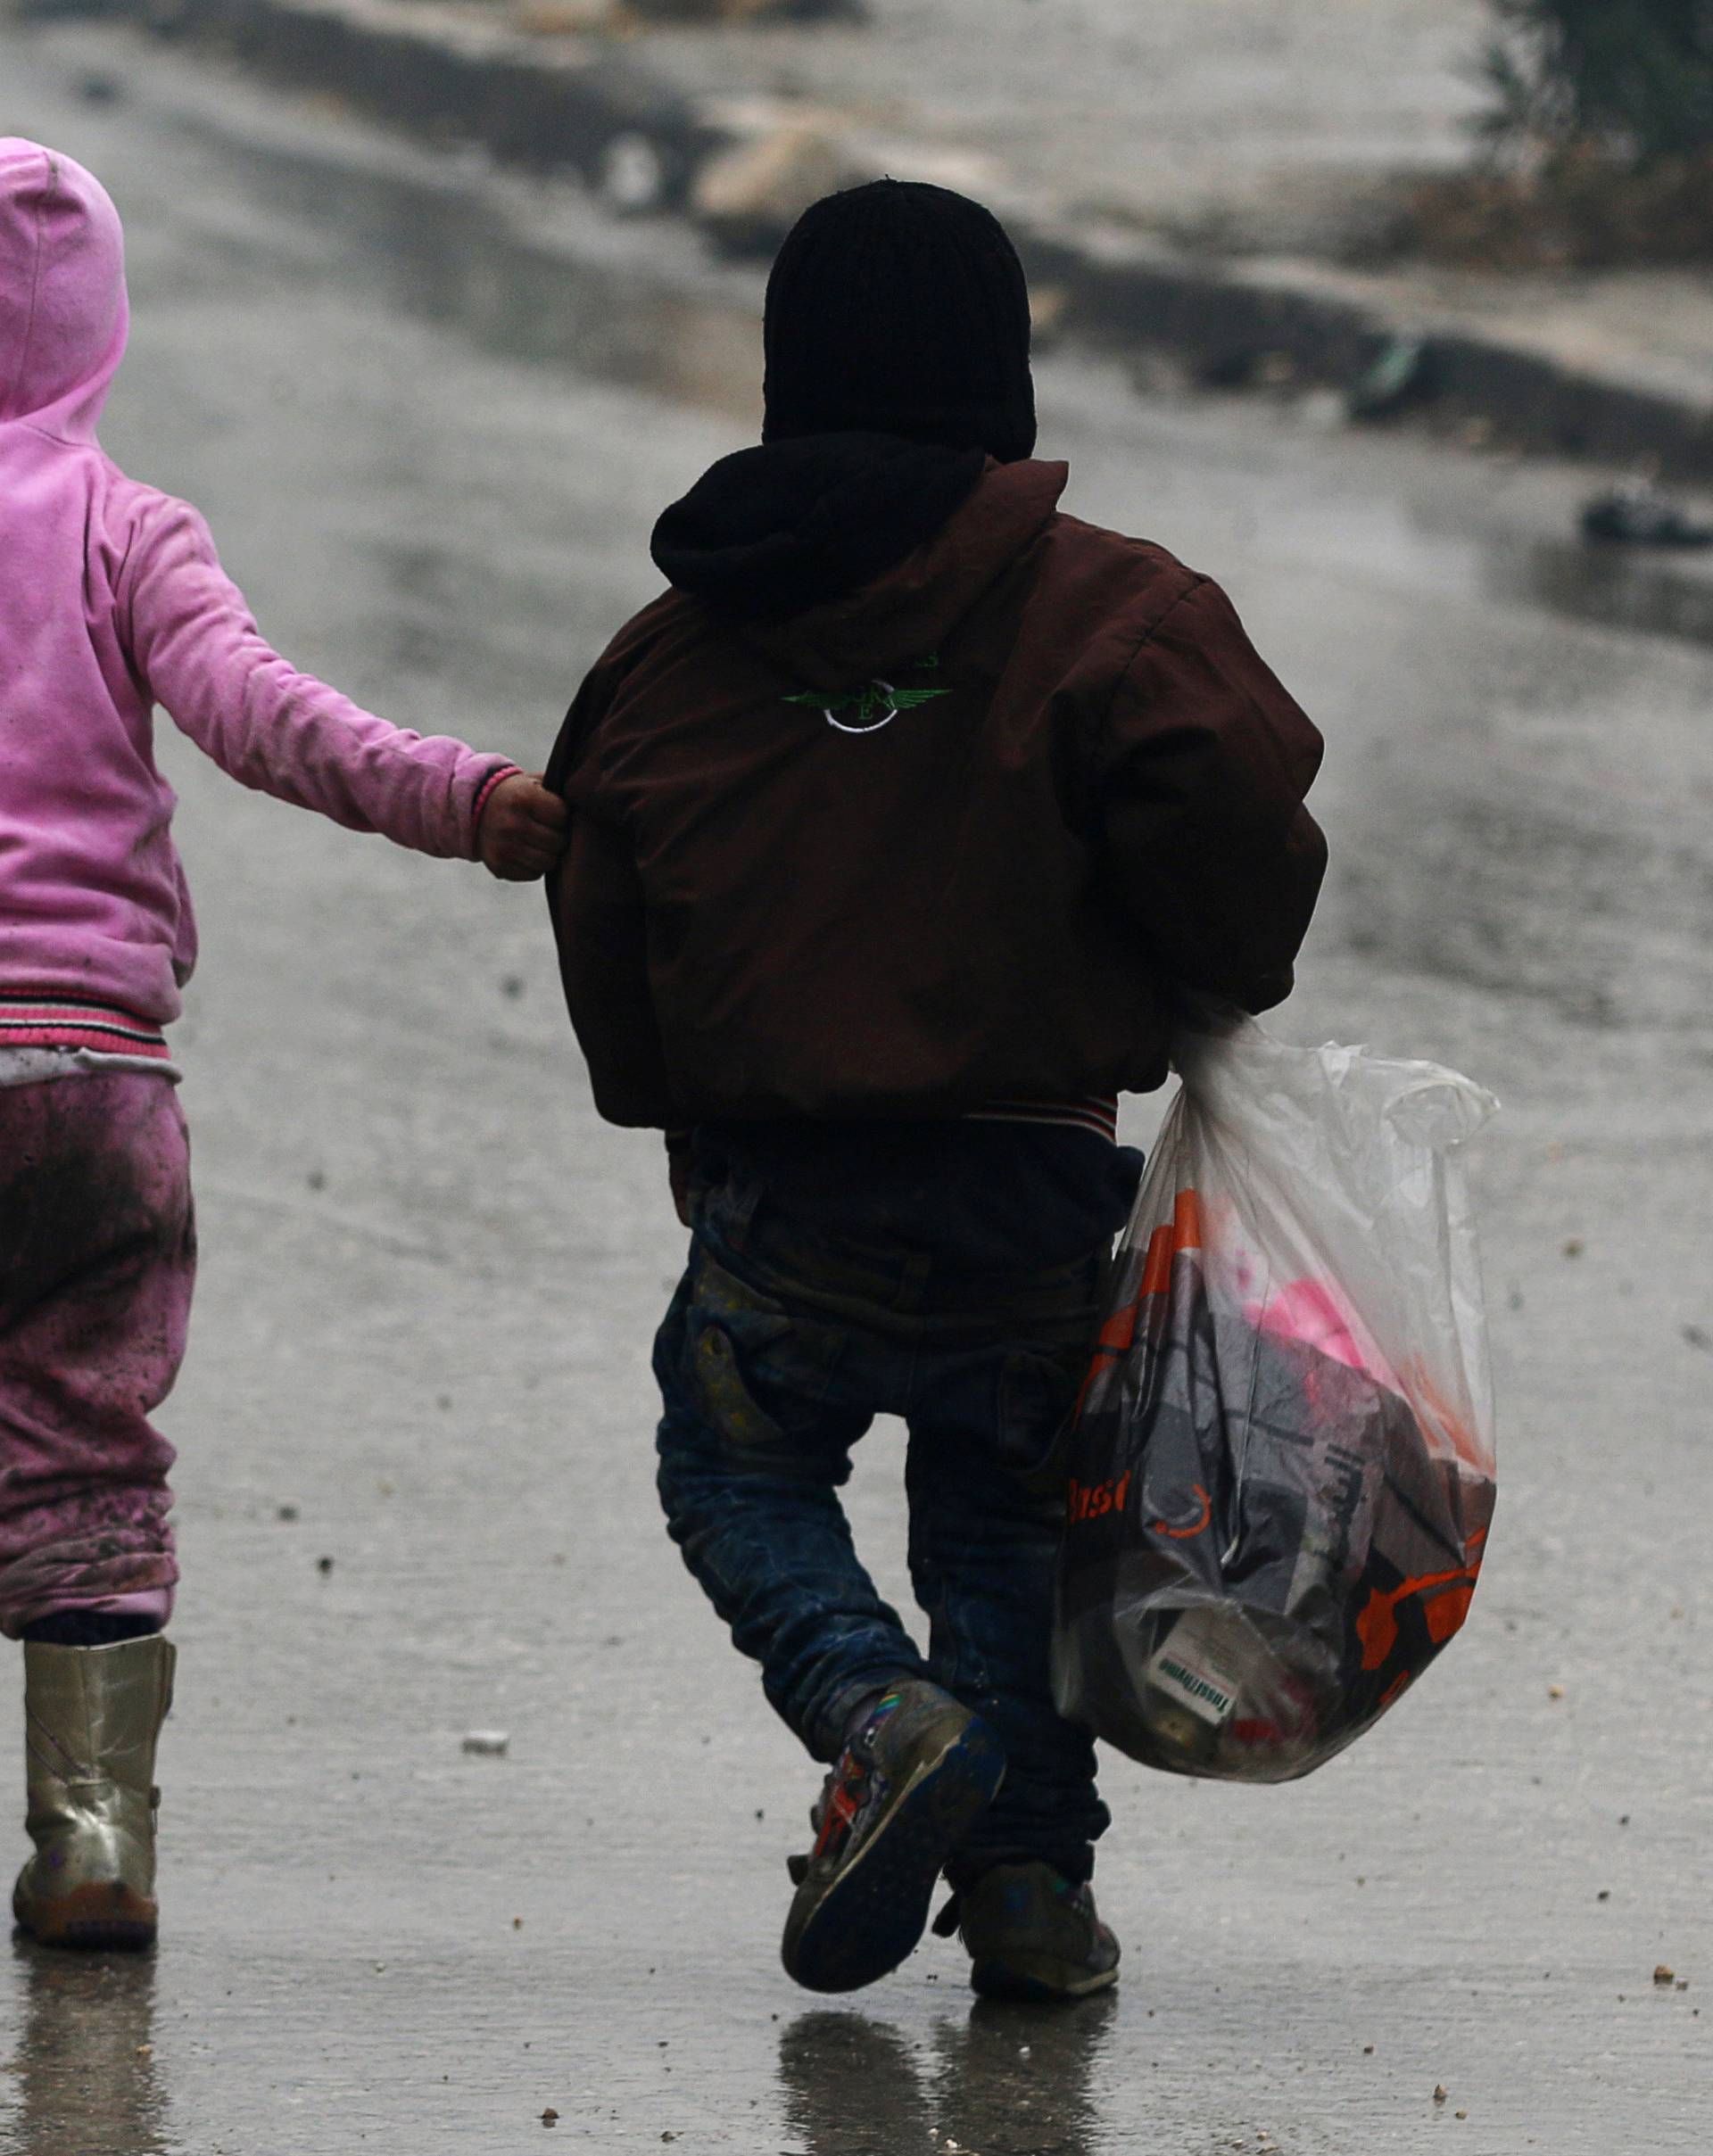 Children walk together as they flee deeper into the remaining rebel-held areas of Aleppo